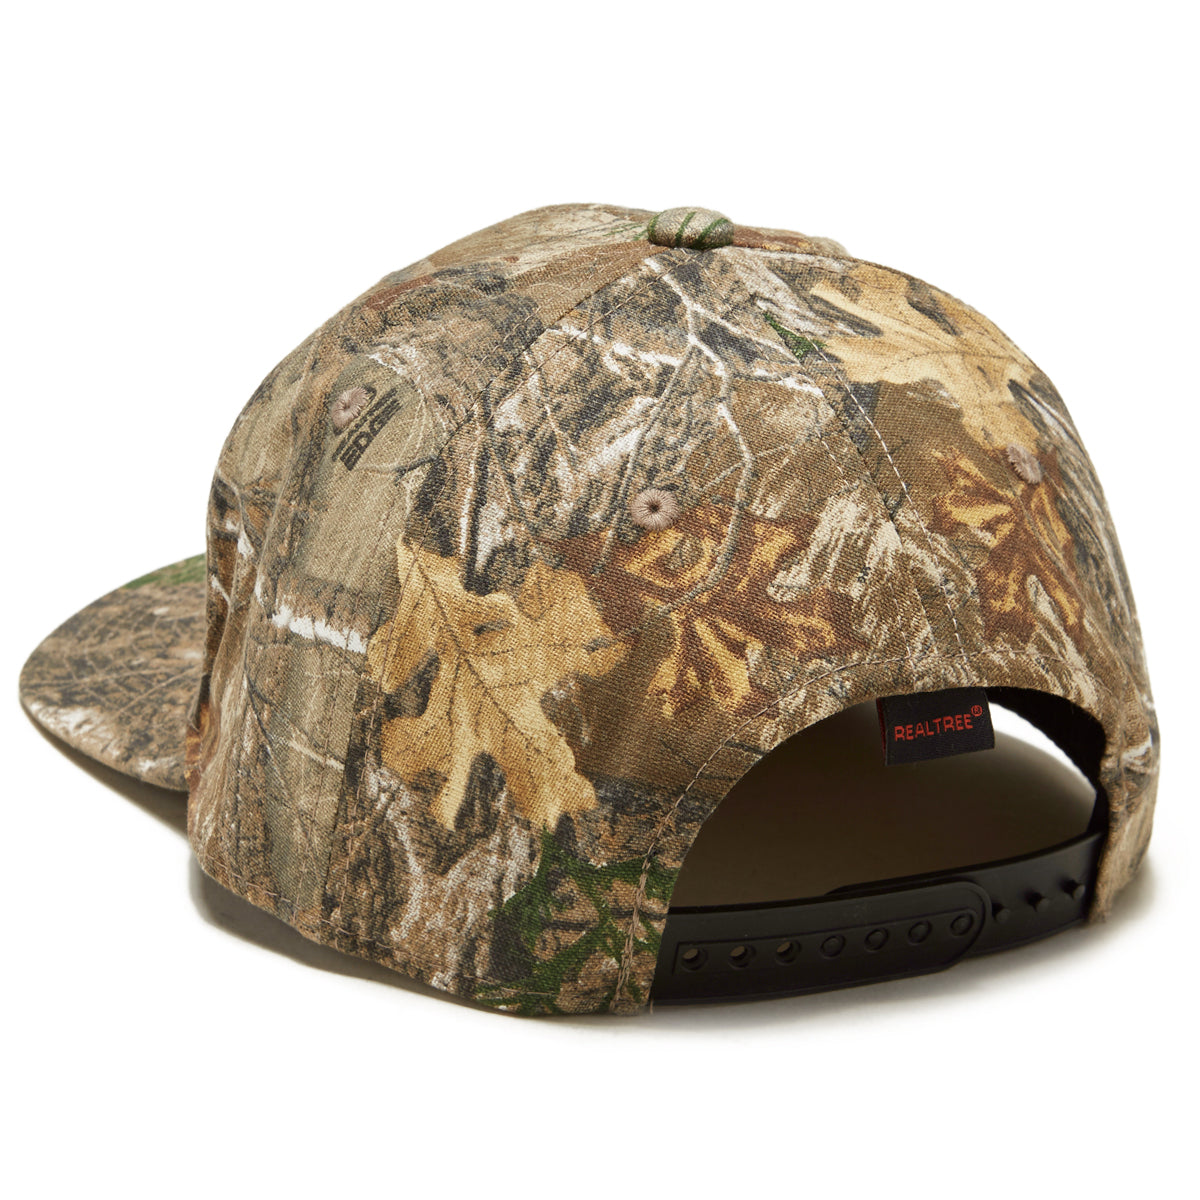 CCS x Realtree Mailorder Patch Hat - Edge image 2